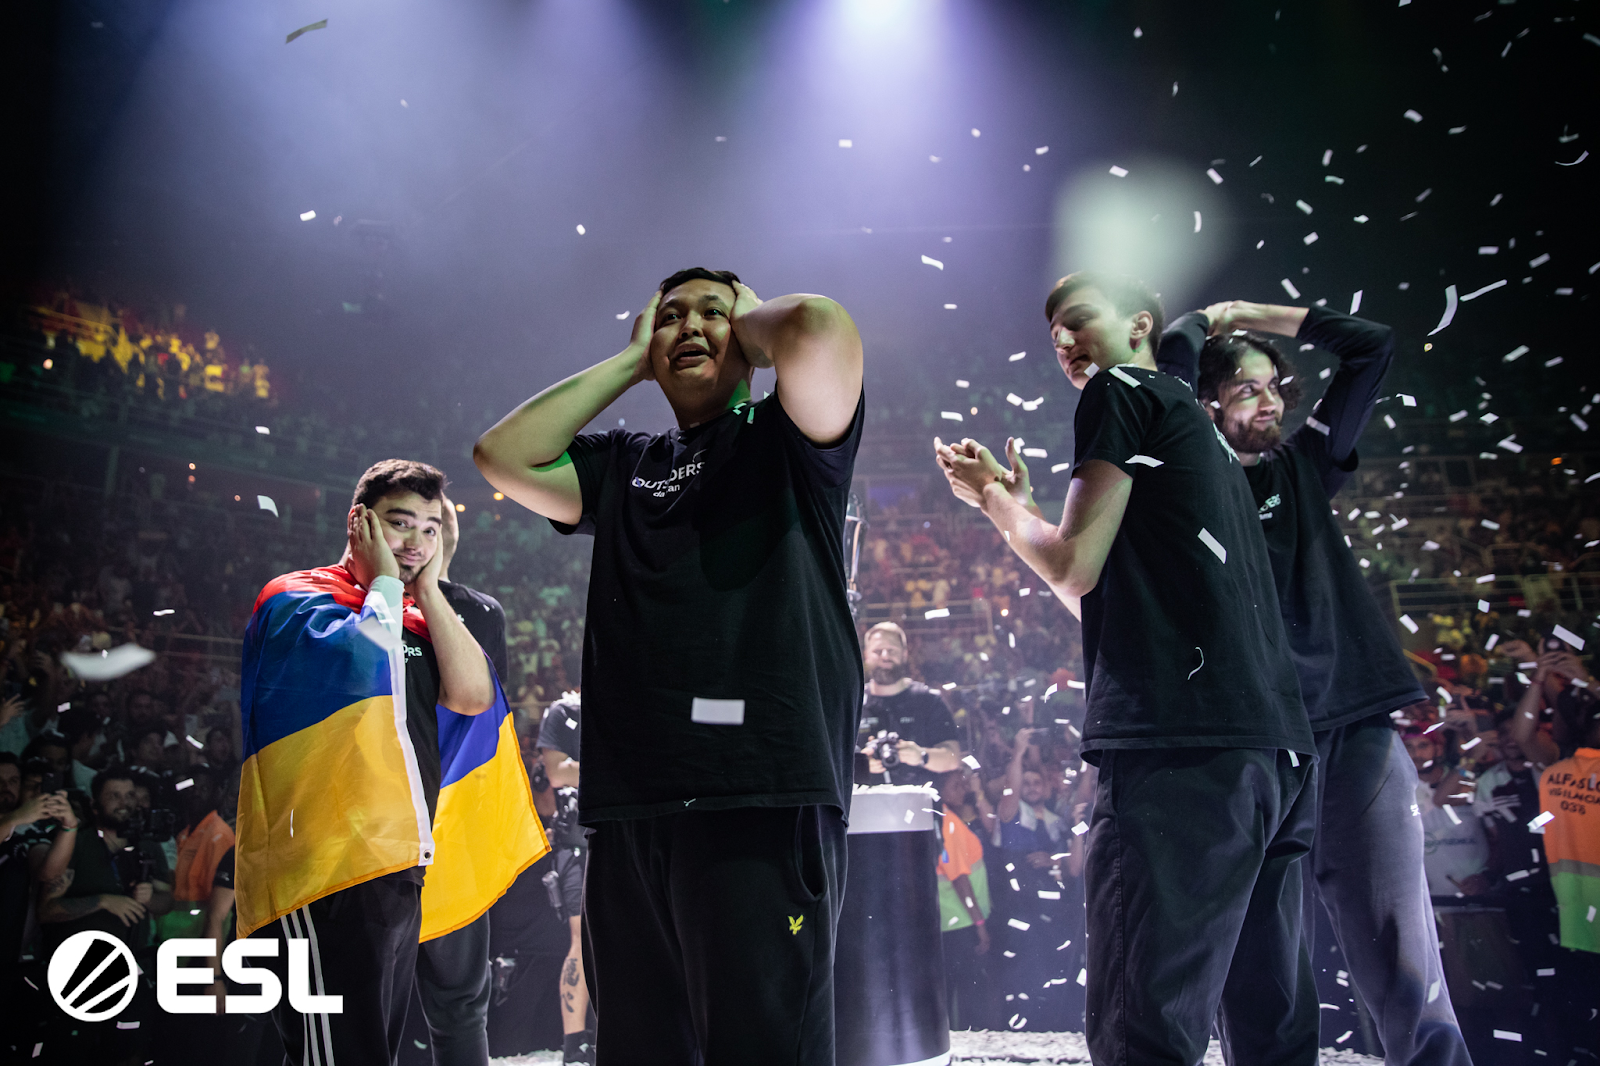 The roster for Outsiders take the stage in awe after taking the win in the Grand Finals at IEM Rio 2022